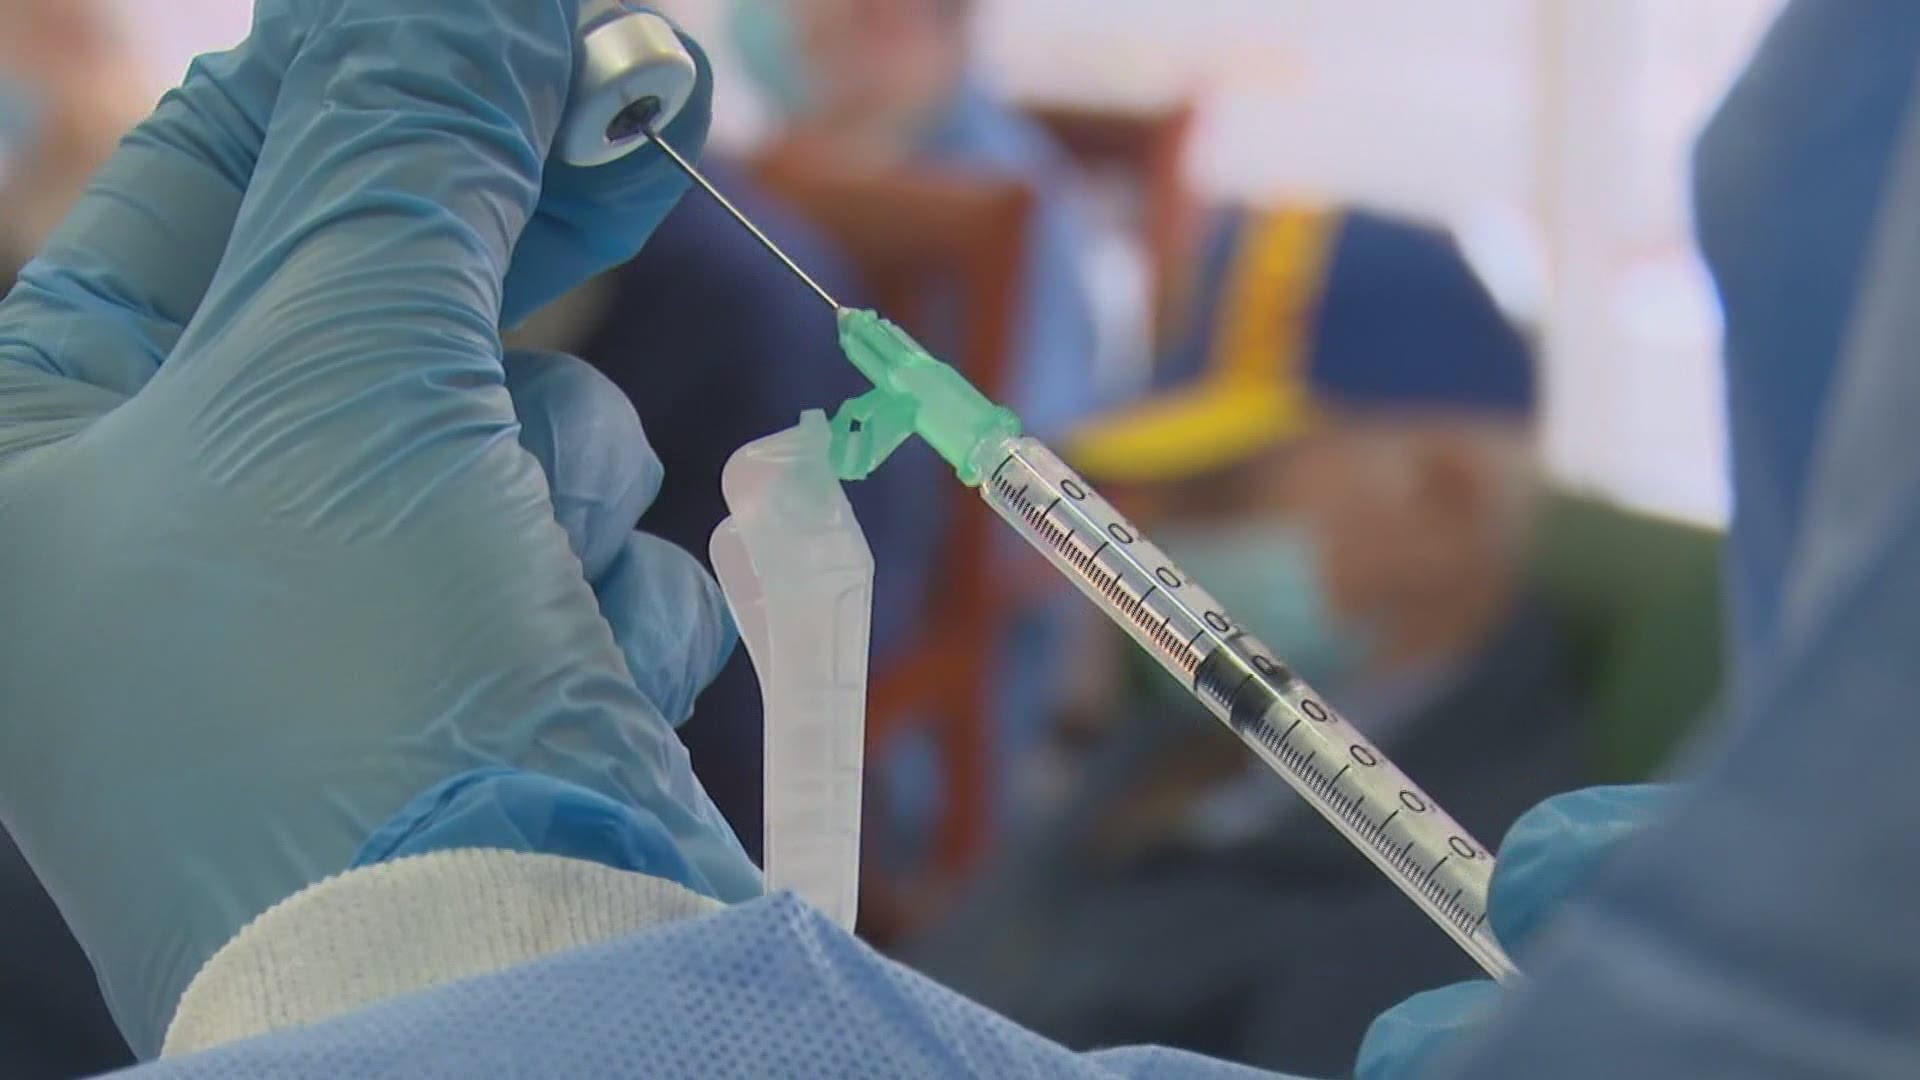 Black and Hispanic residents have a disproportionately low vaccination rate compared to other communities. A vaccine clinic in Seattle is hoping to remedy that.